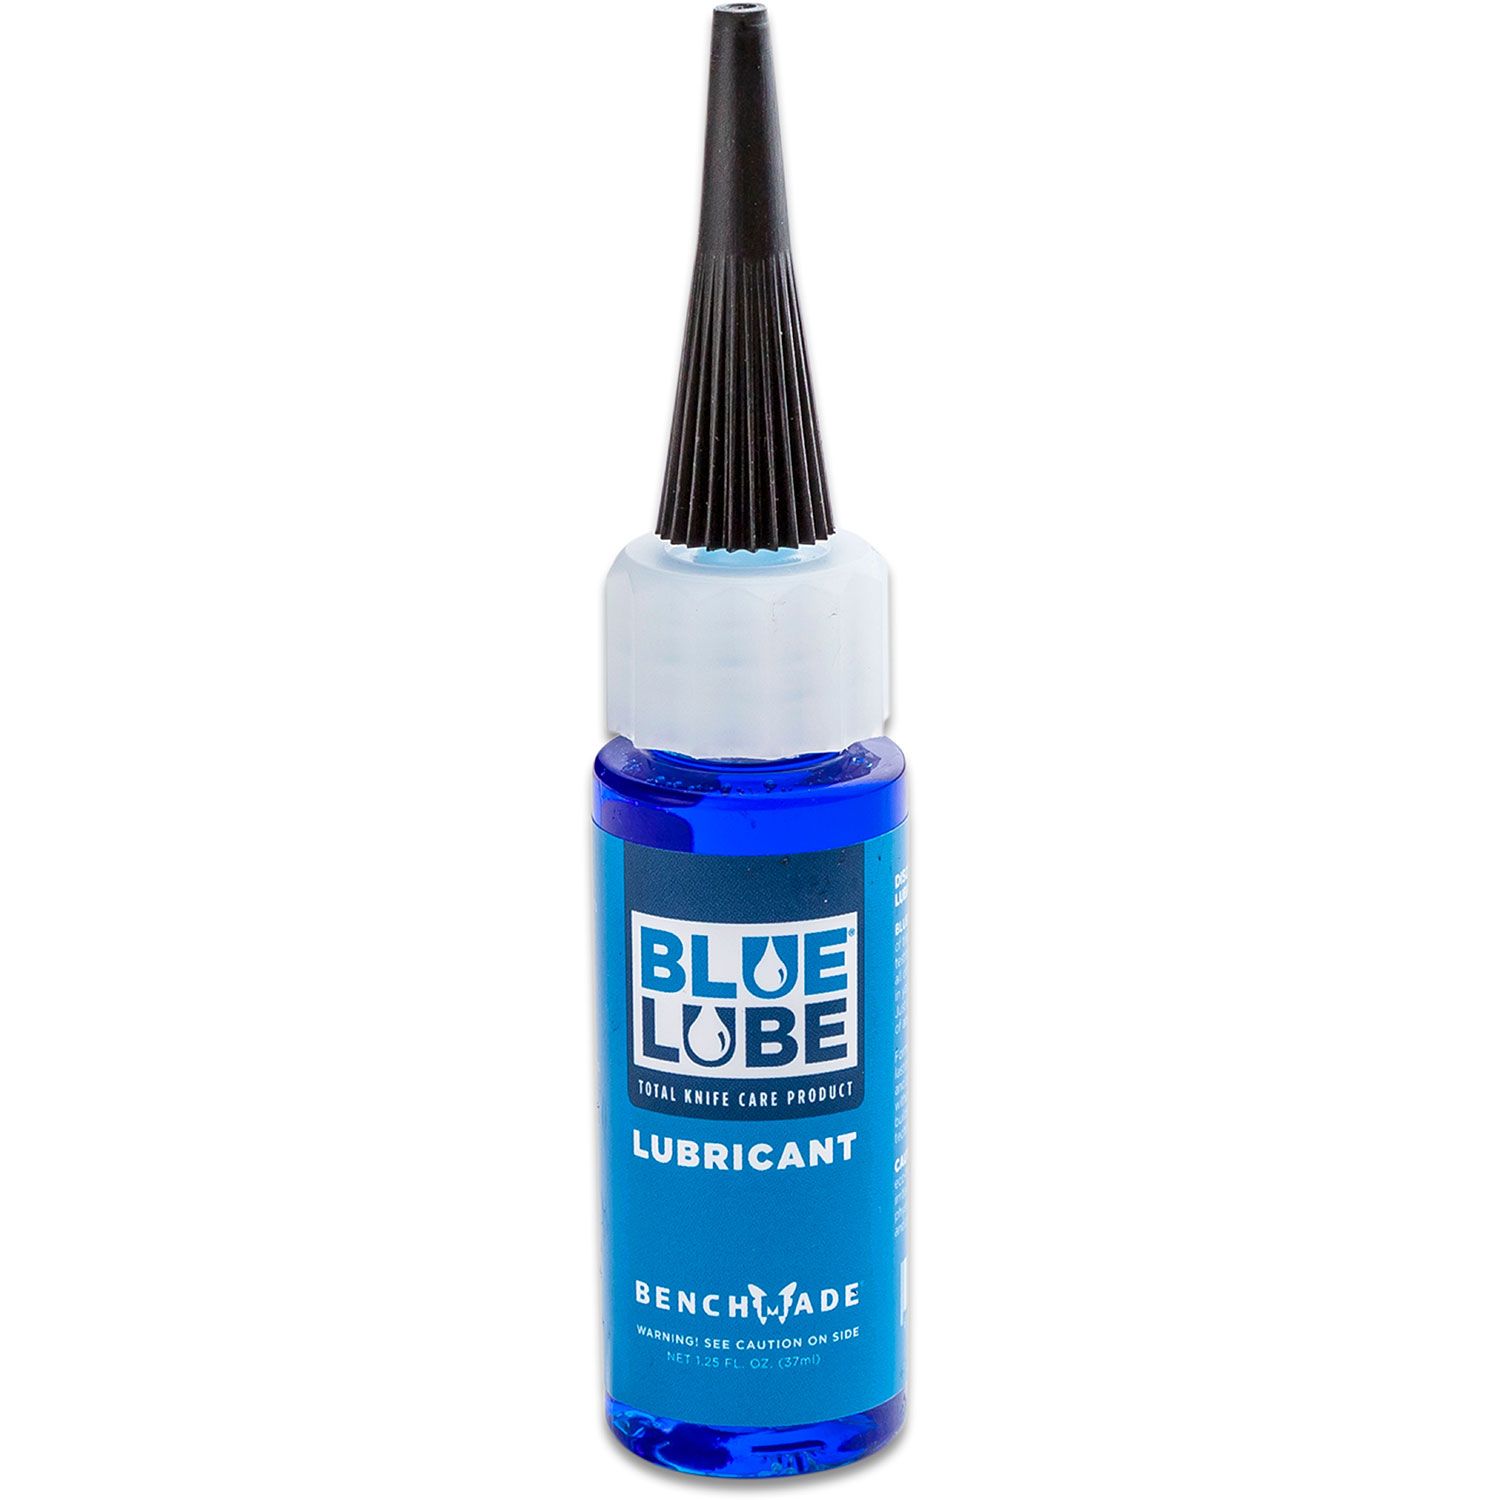 Benchmade BlueLube Lubricant 1.25 oz Bottle with Nozzle - KnifeCenter -  983900F